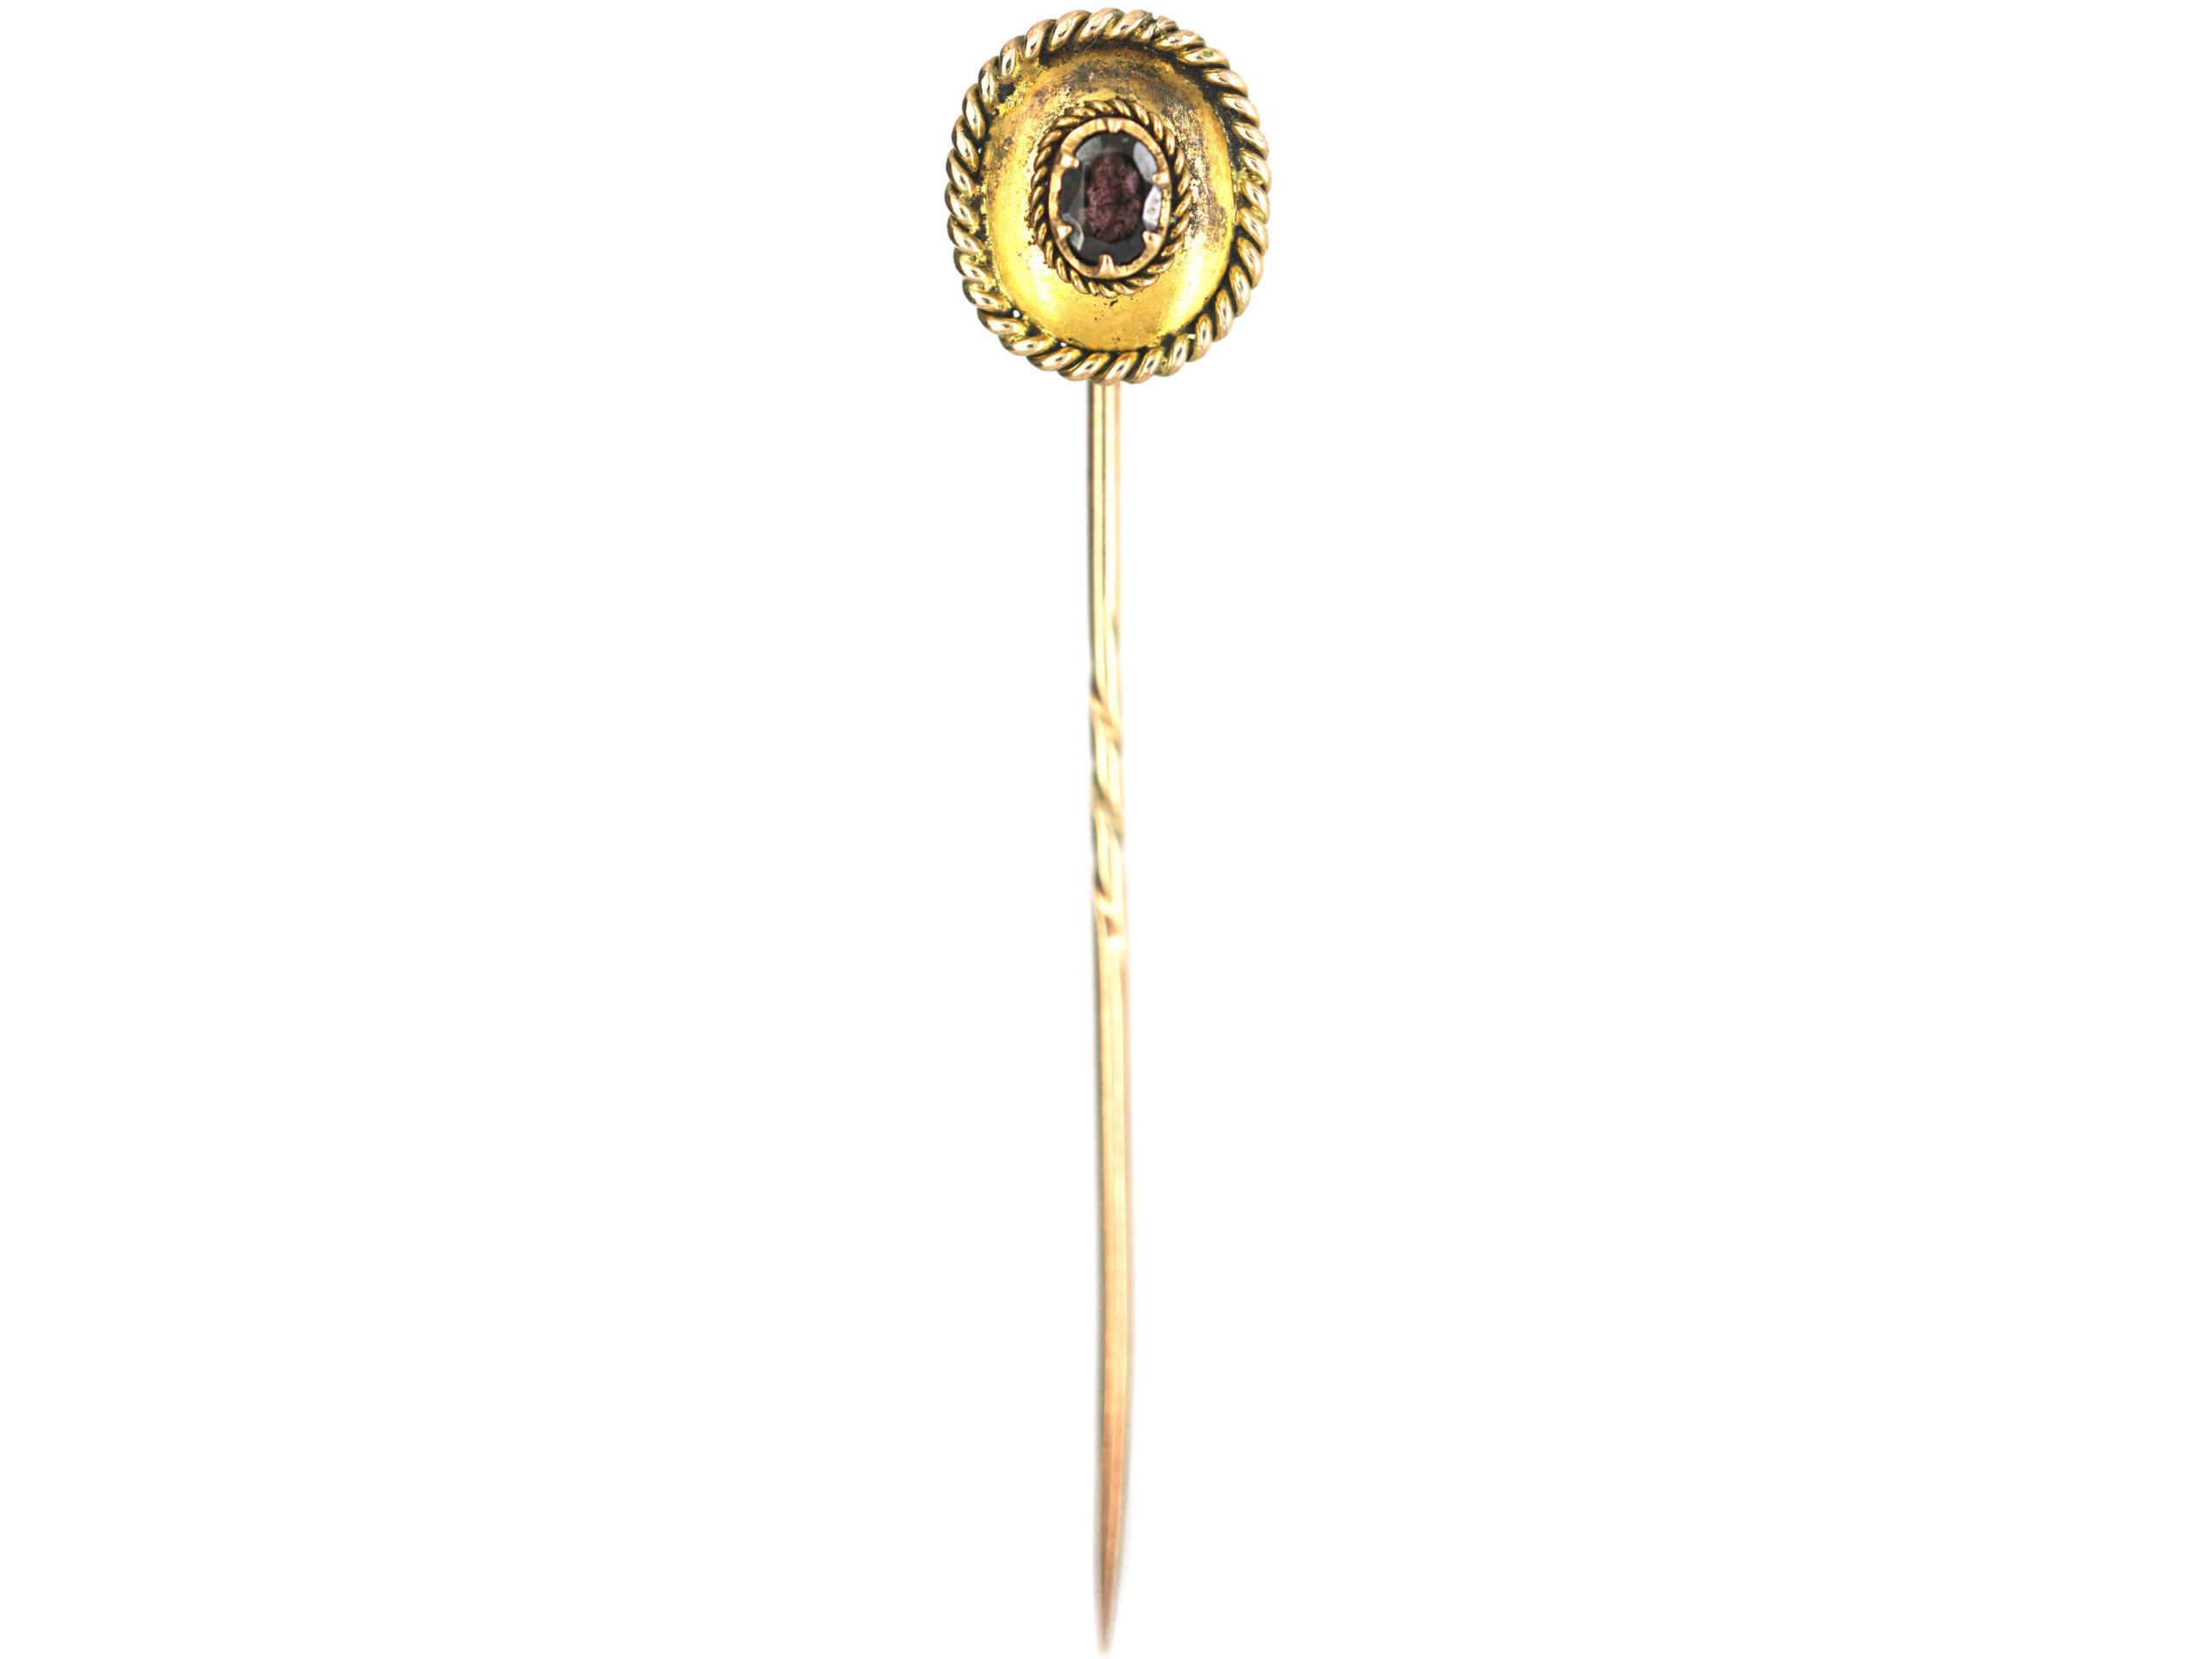 Victorian 15ct Gold Tie Pin set with a Garnet (838N) | The Antique ...